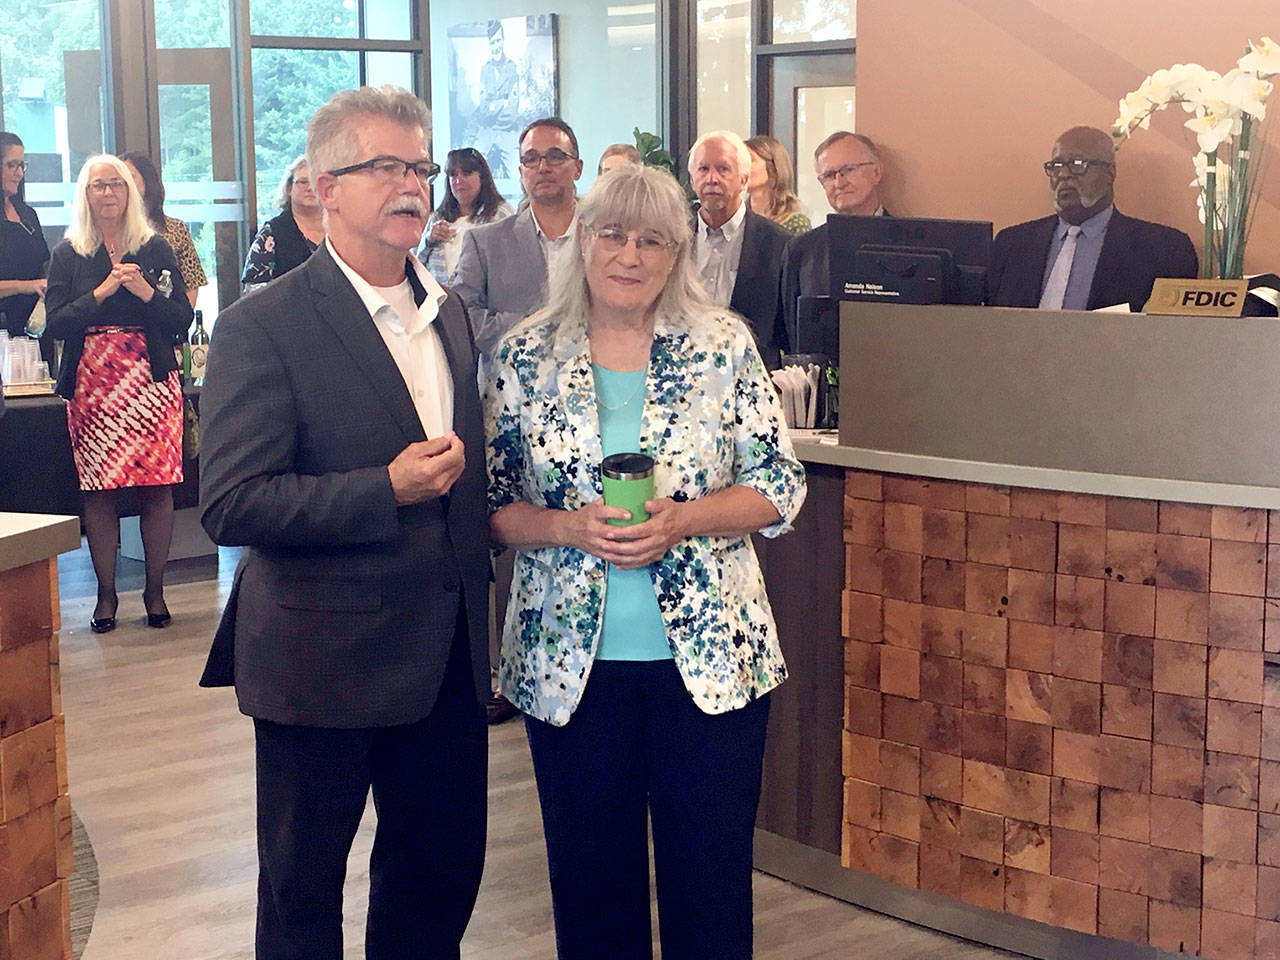 Karen McCormick is honored at a retirement ceremony at the First Federal branch in east Port Angeles. Pictured with McCormick is First Federal President and CEO Larry Hueth. (Rob Ollikainen/Peninsula Daily News)